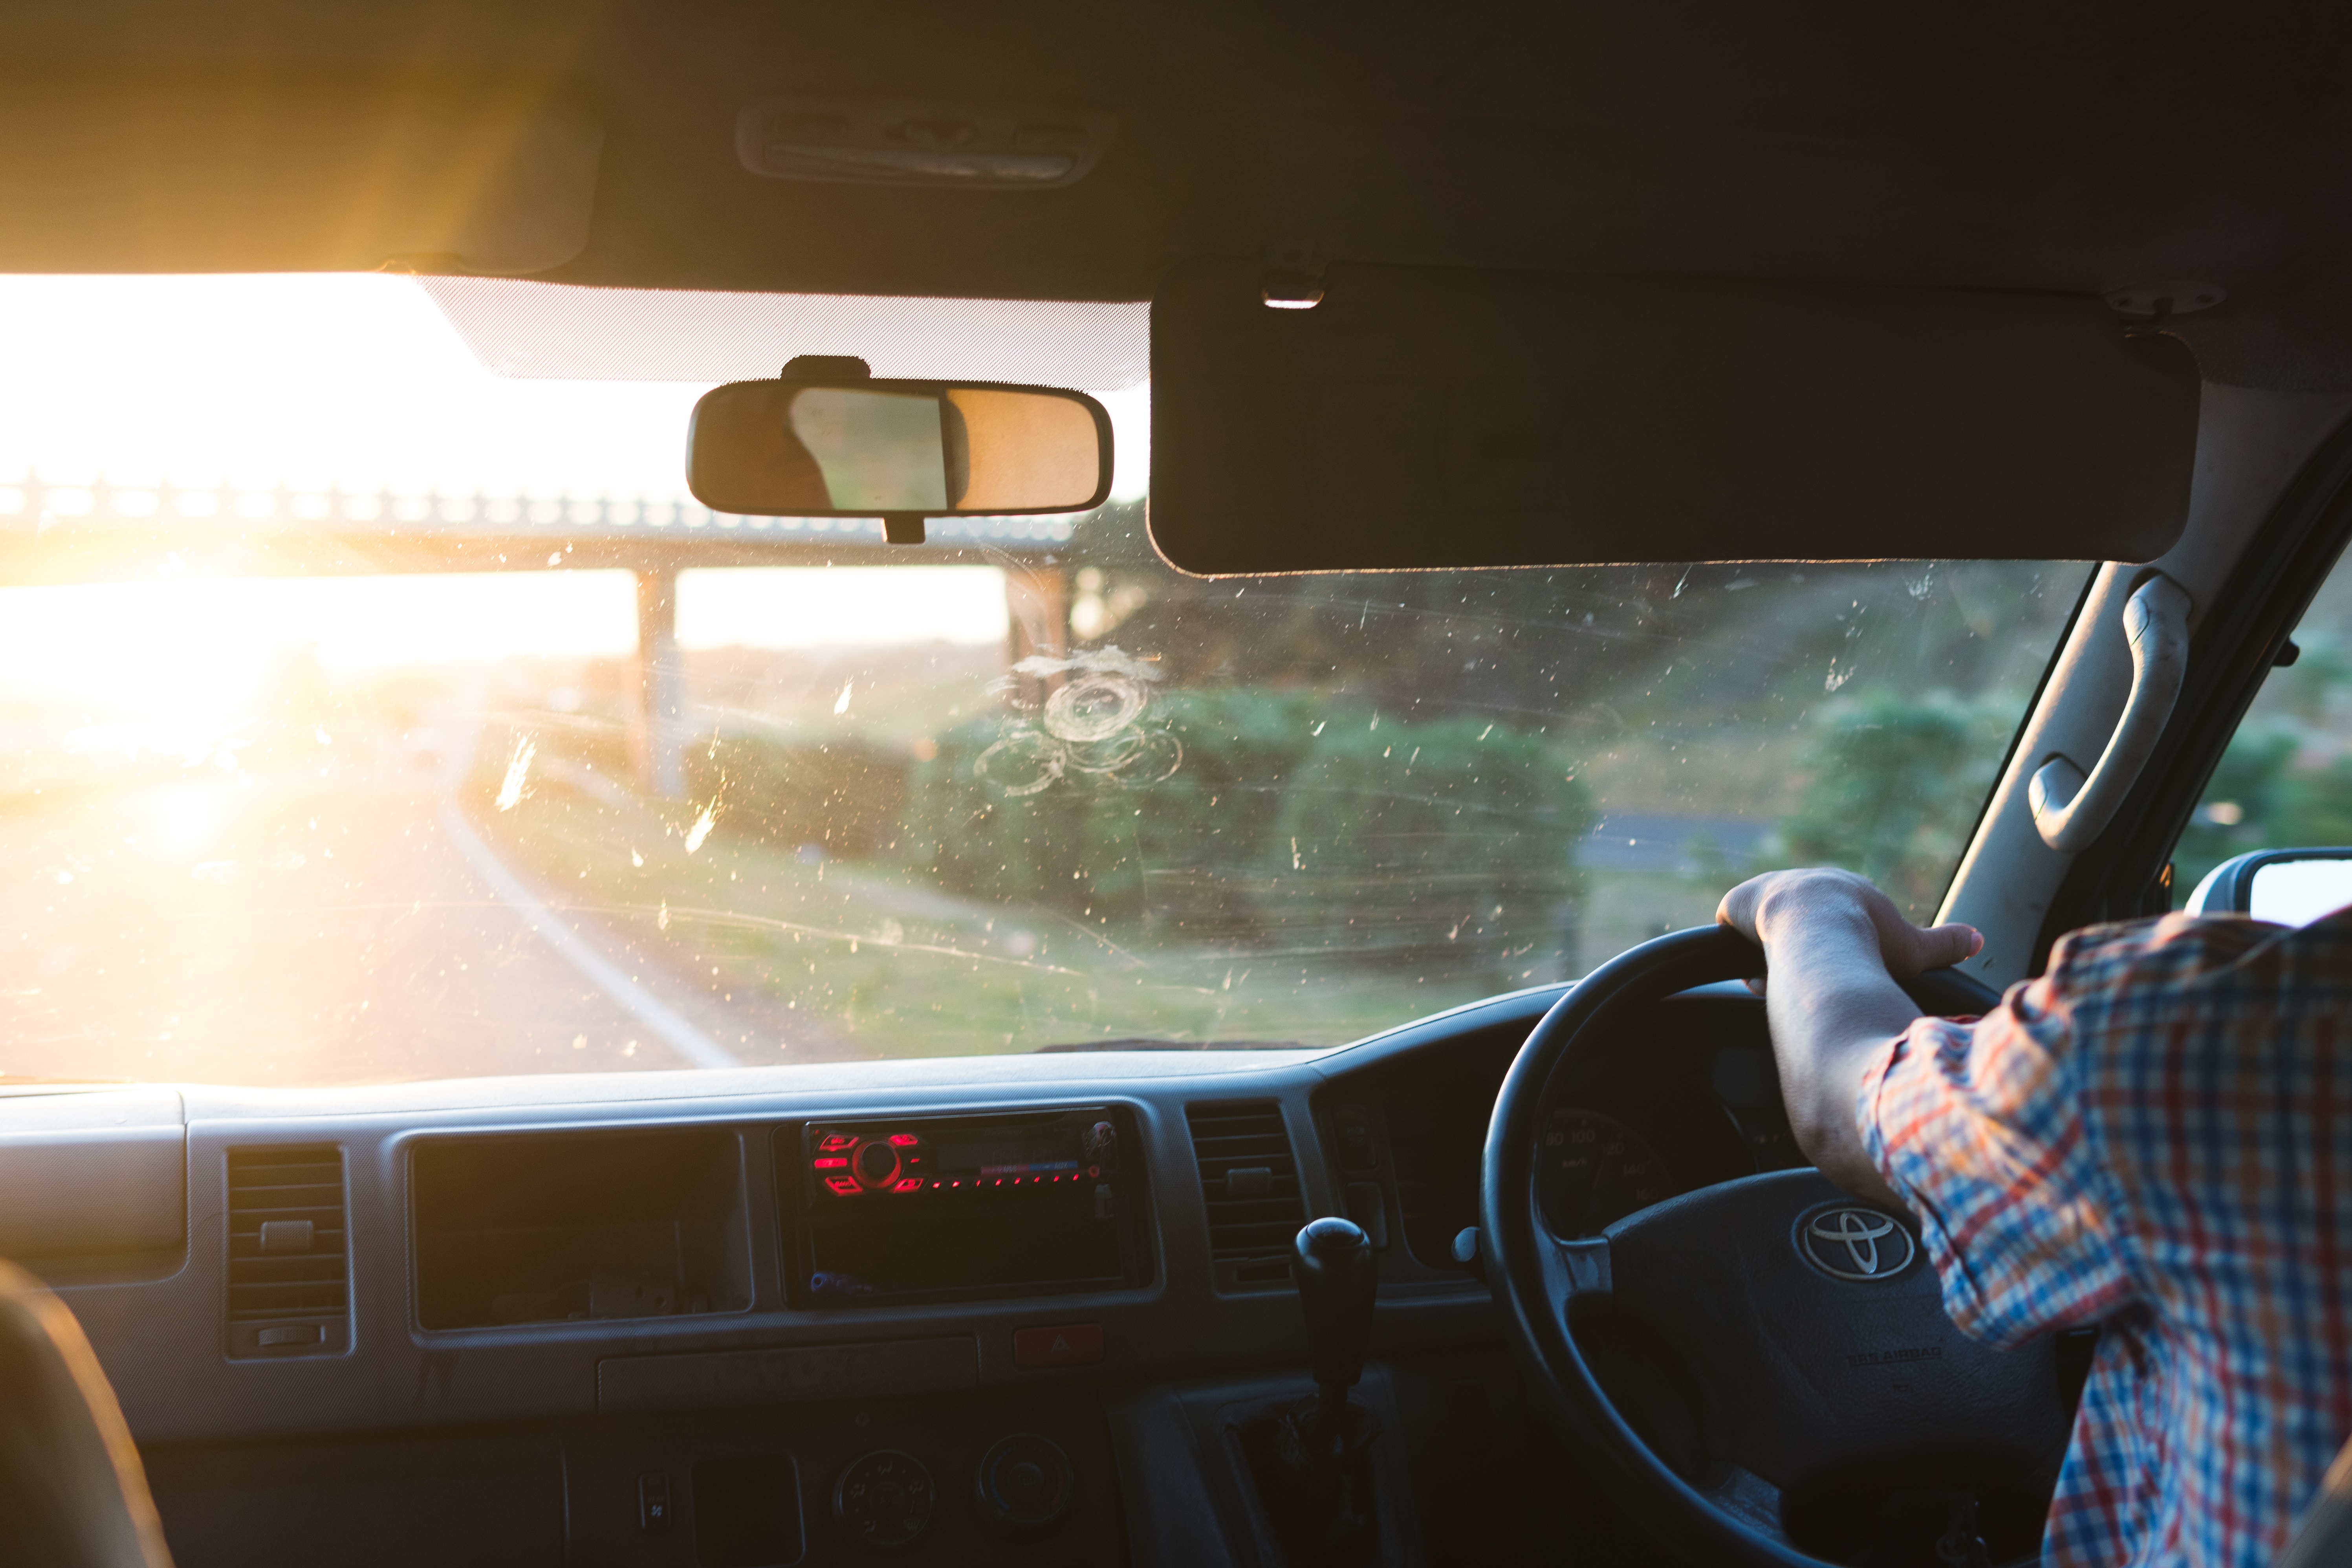 What Are The Most Common Causes Of Damage To A Windscreen?